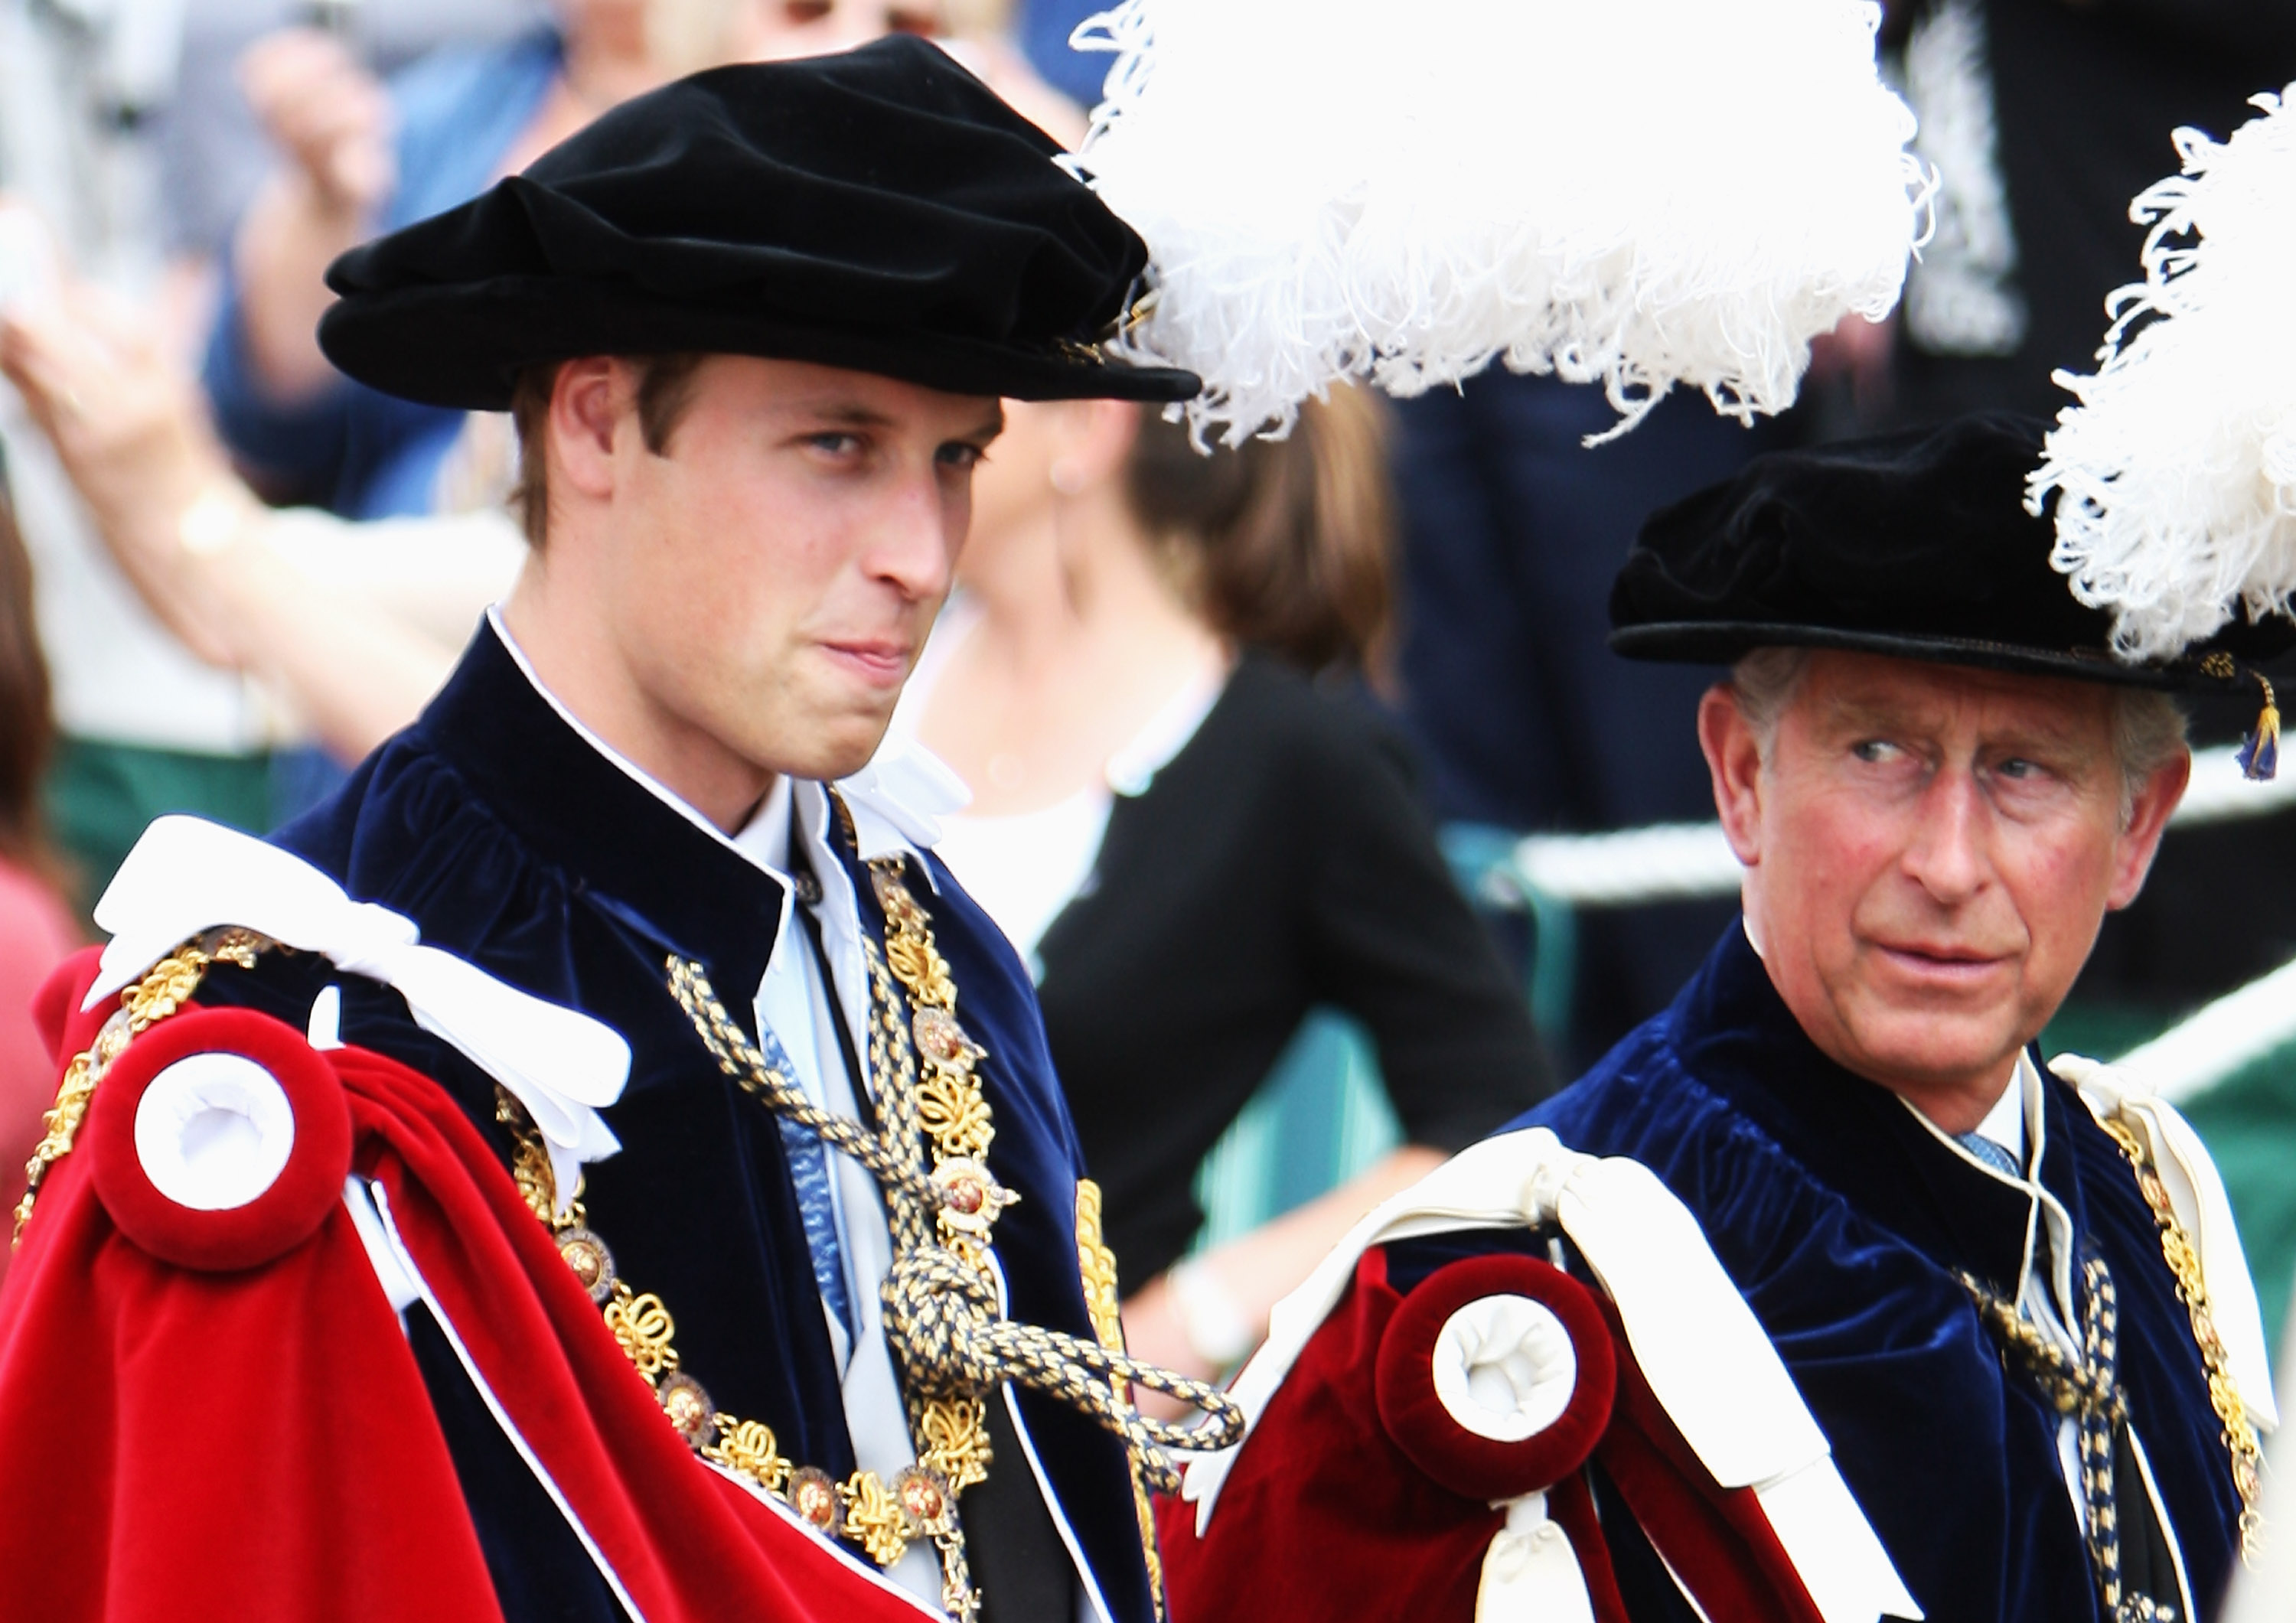 Prince William photographed next to Prince Charles as they walk to St. George's Chapel on Garter Day